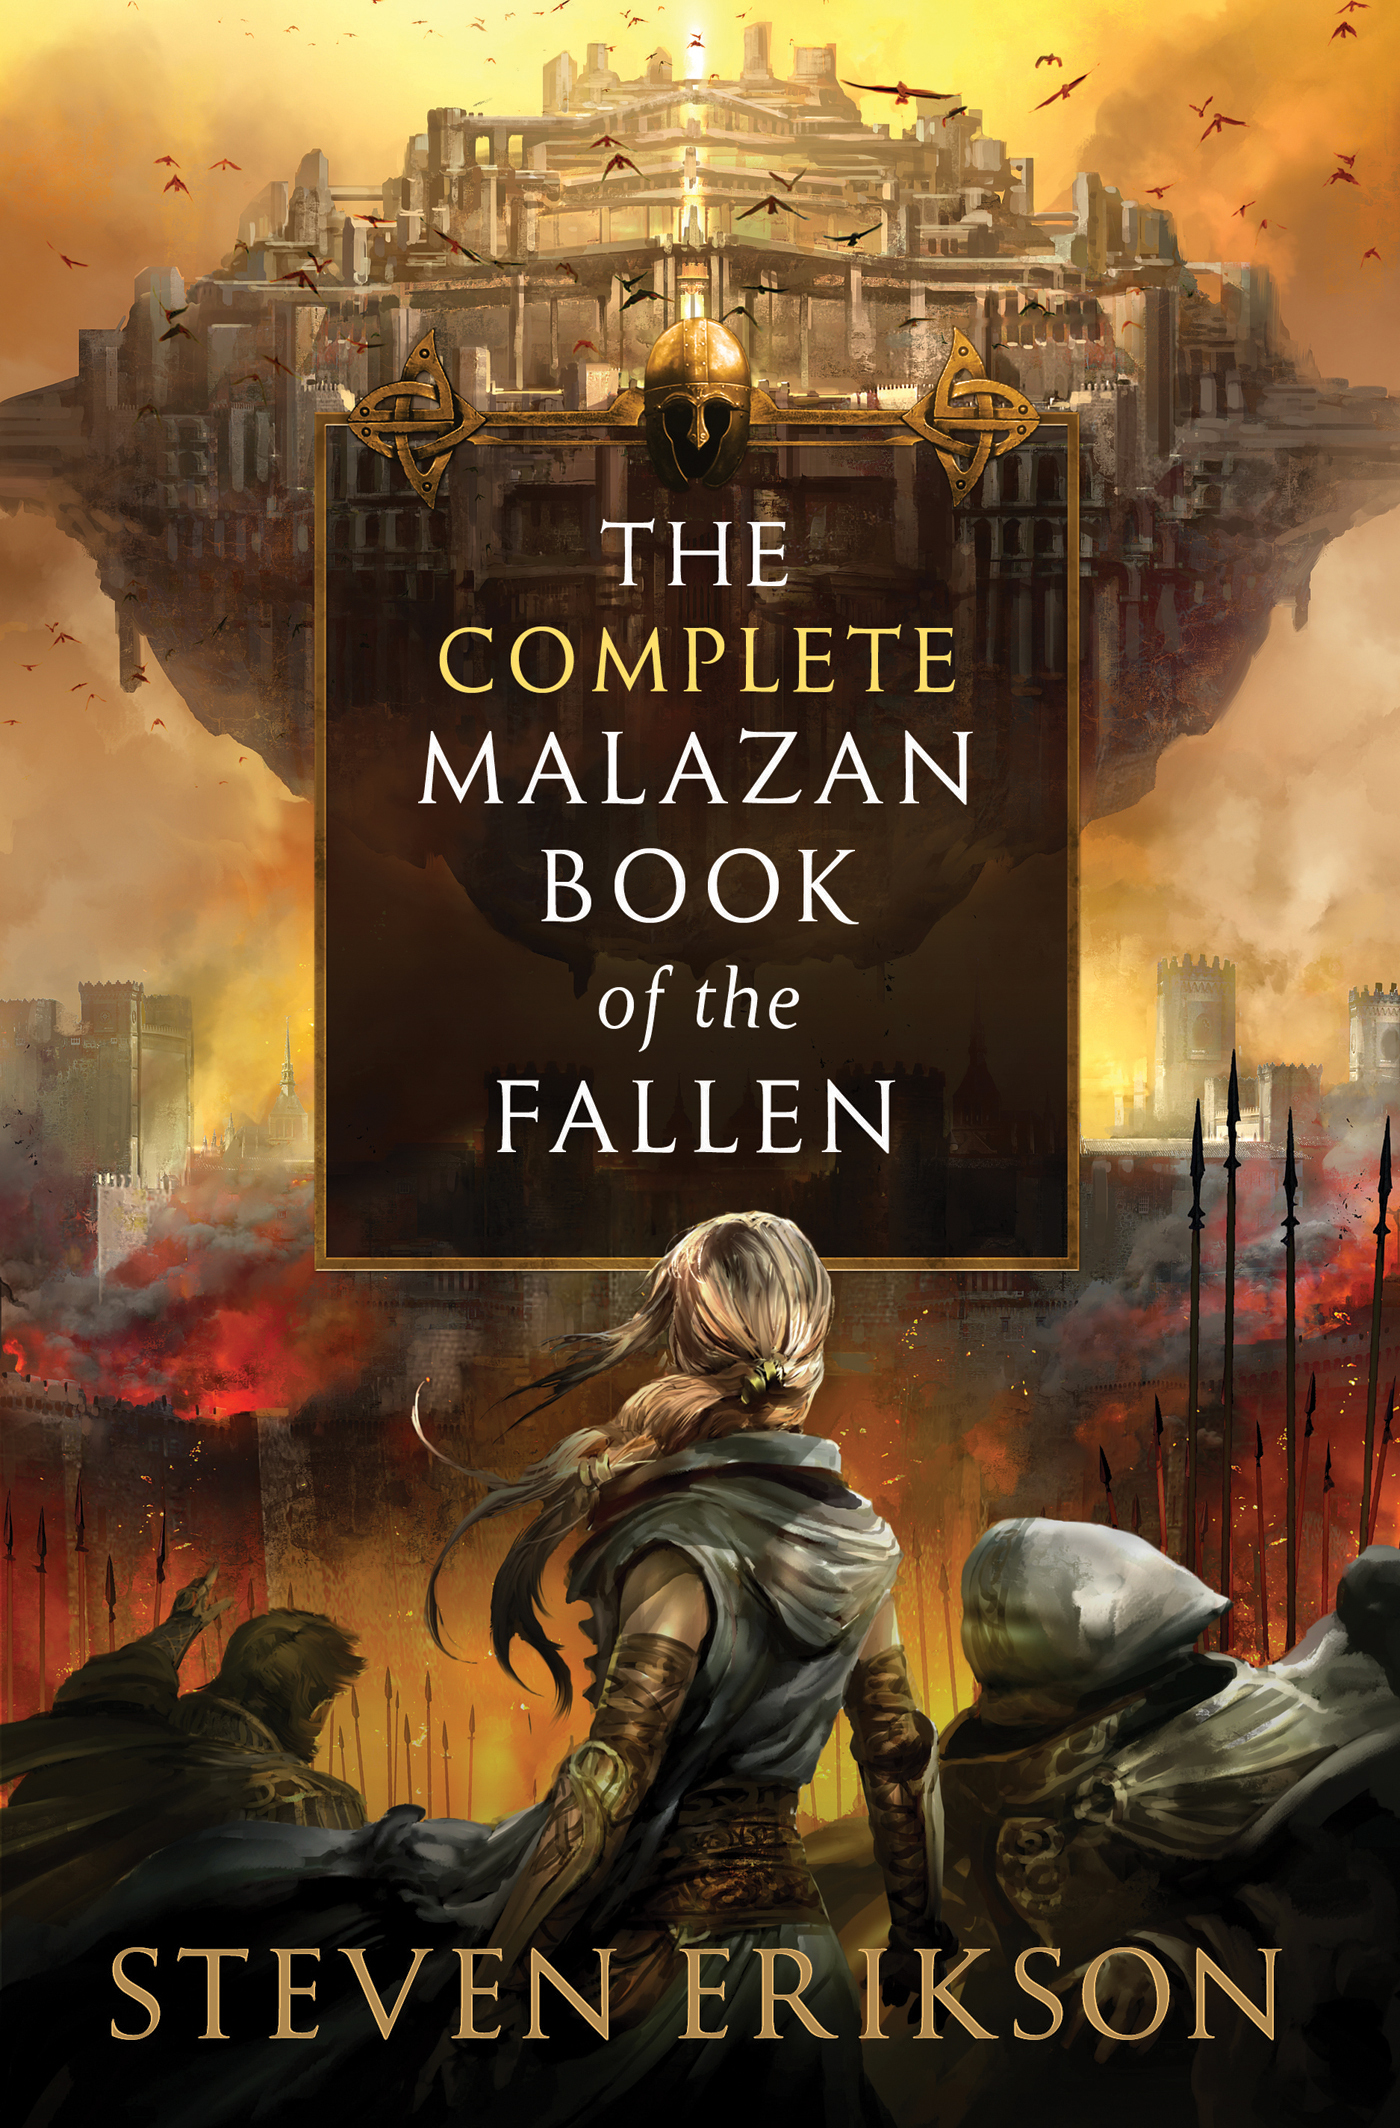 The Complete Malazan Book of the Fallen by Steven Erikson